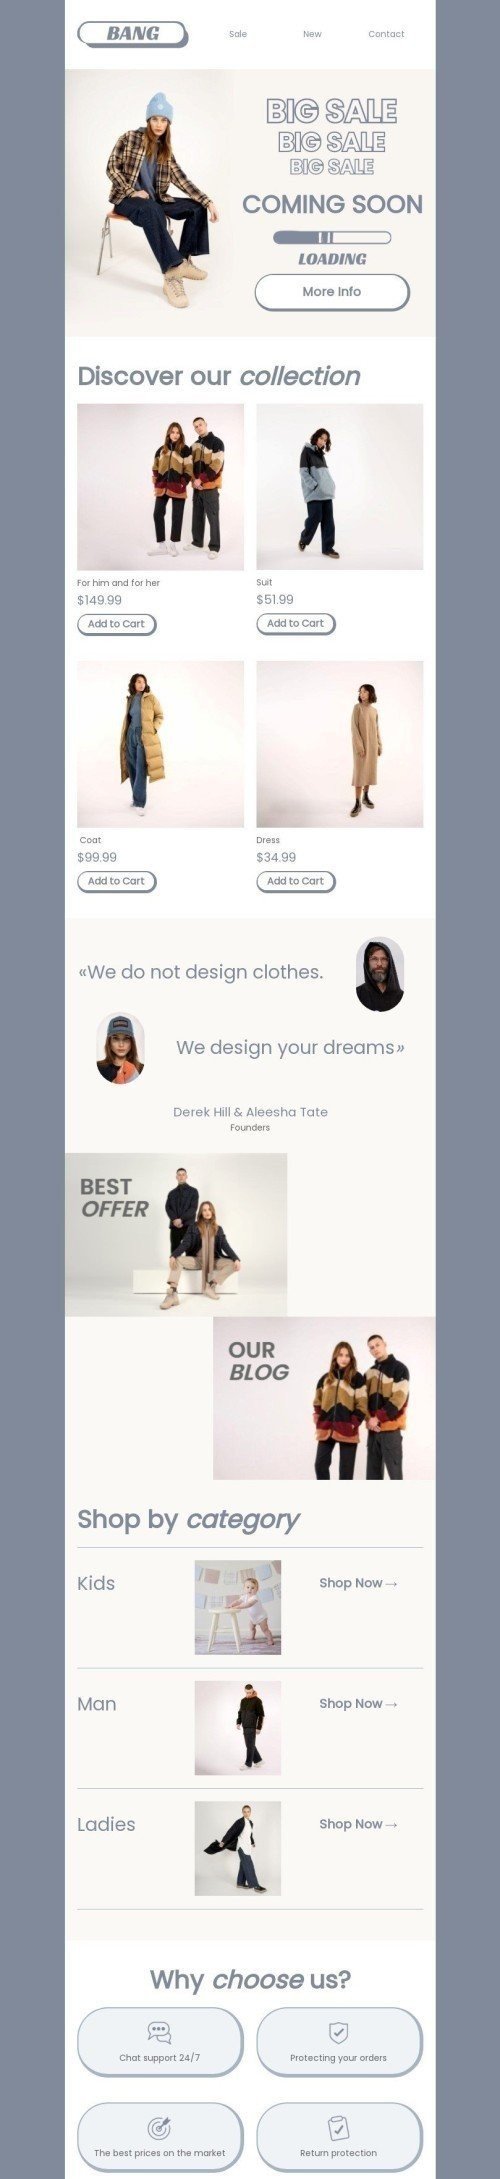 Coming Soon Email Template "We design your dreams" for Fashion industry desktop view